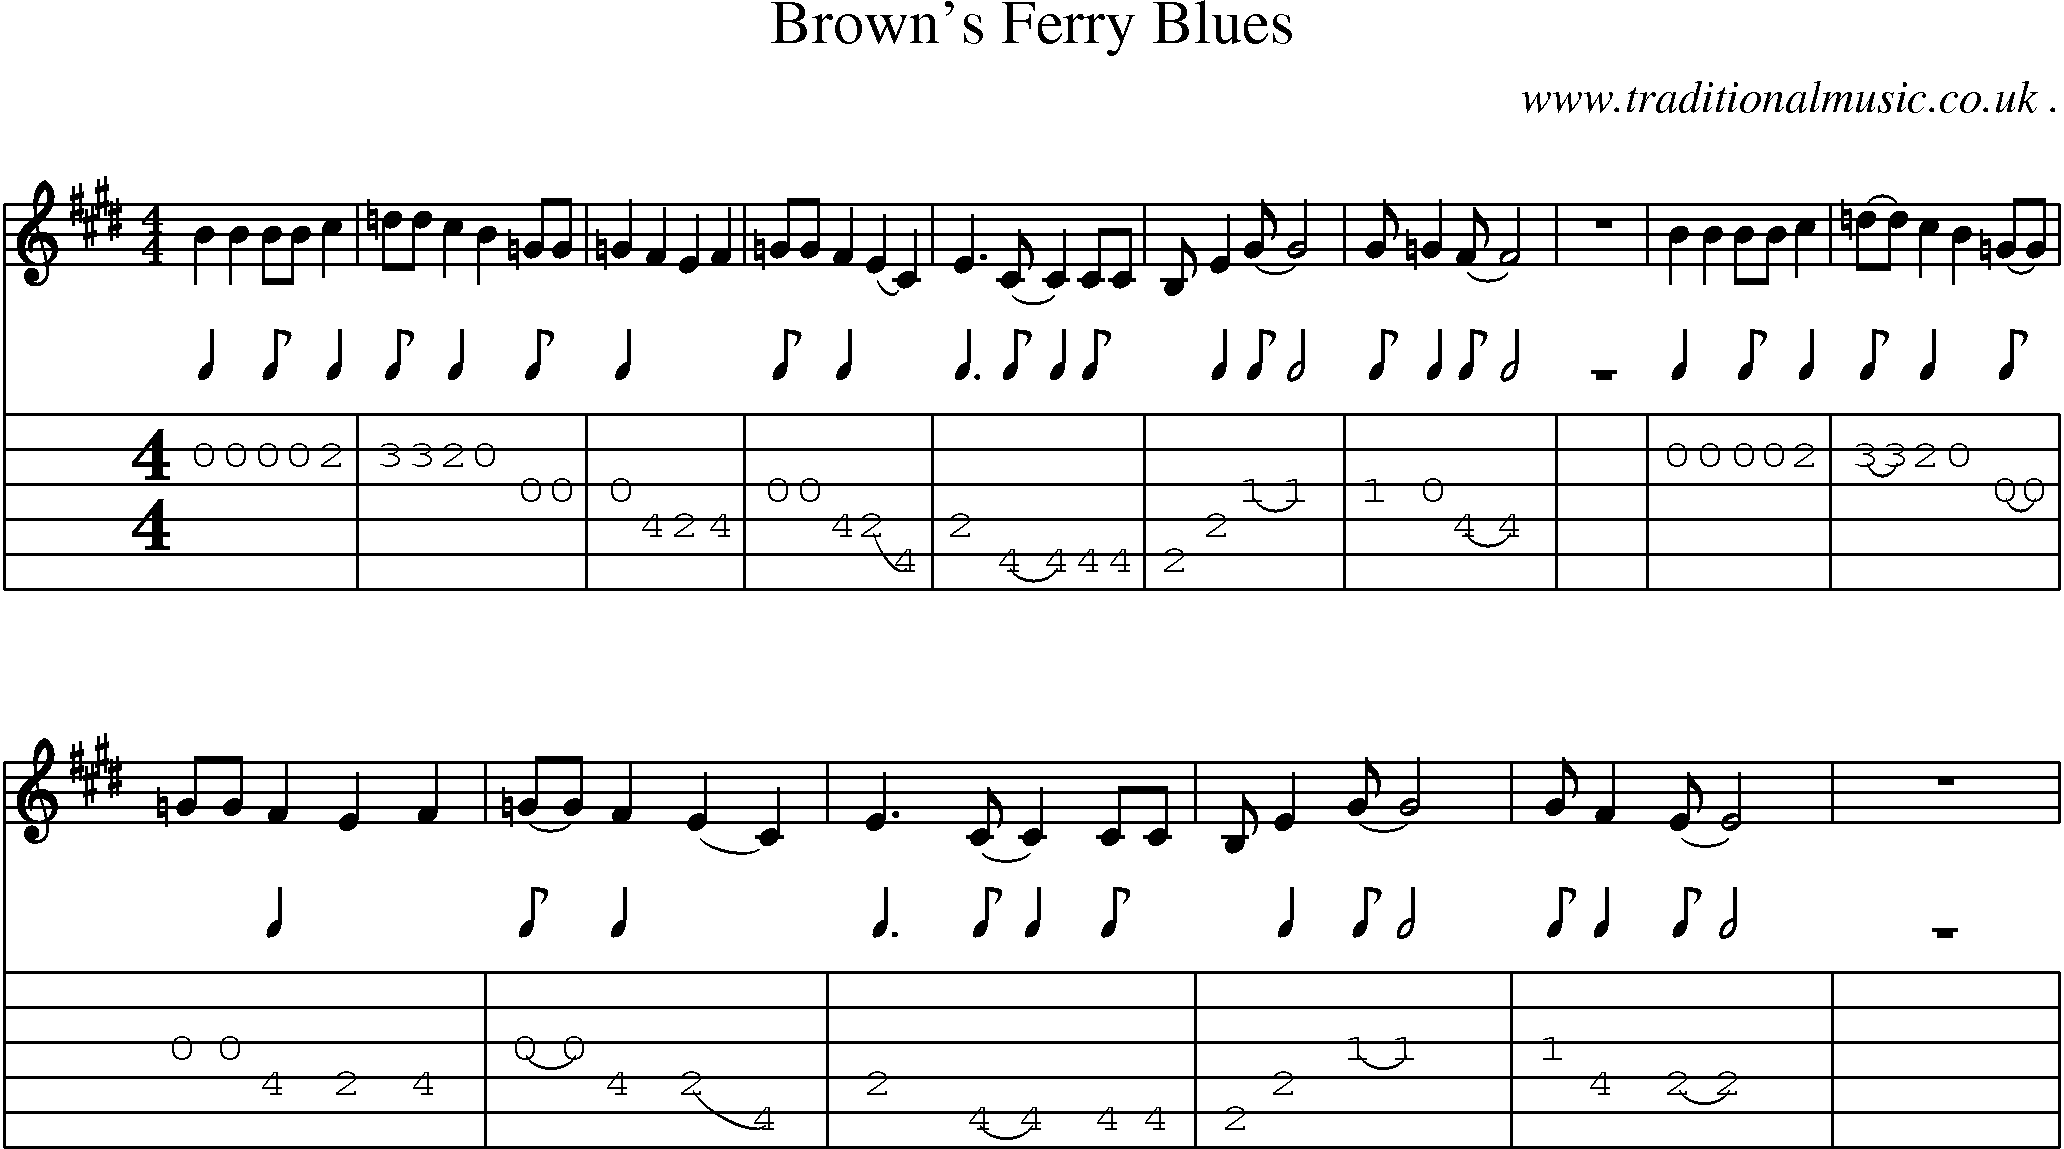 Music Score and Guitar Tabs for Browns Ferry Blues